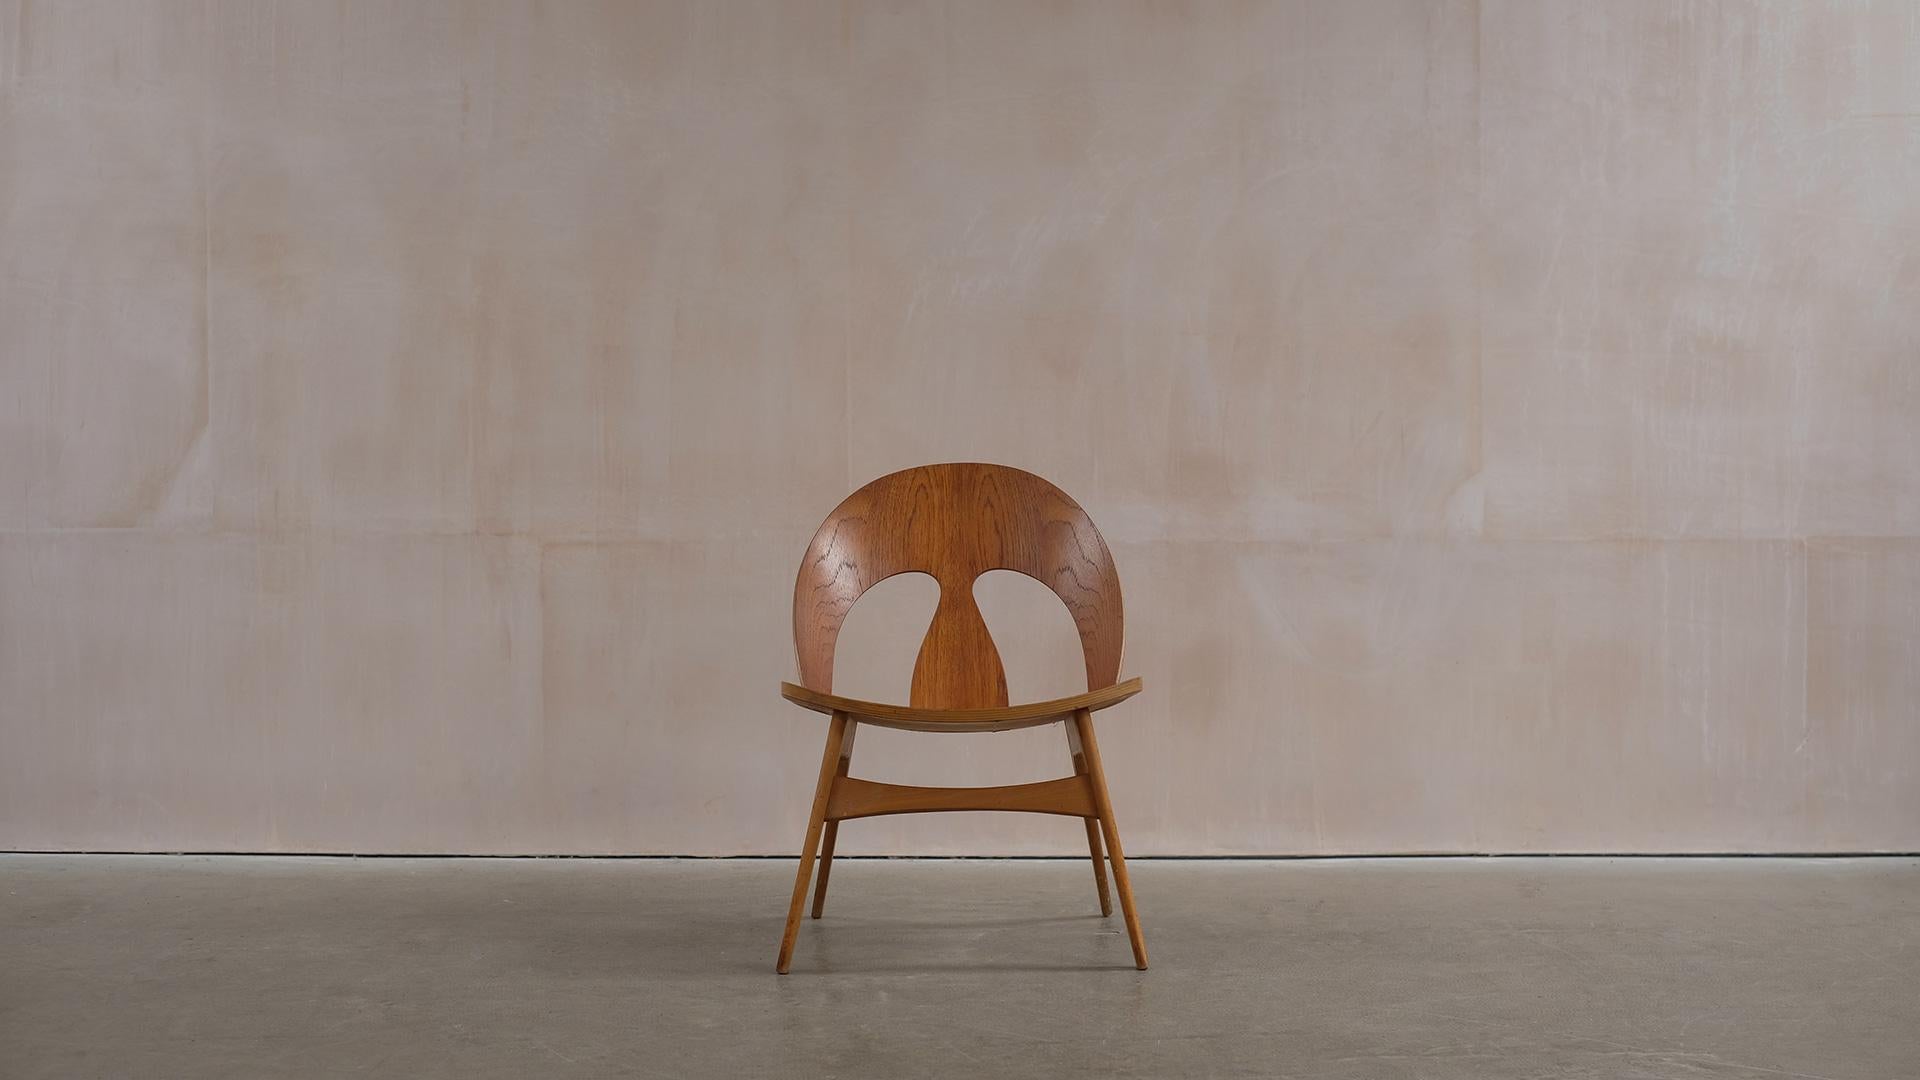 Ultra rare shell chair in solid beech and sculptural teak plywood designed by Borge Mogensen for cabinet maker Erhard Rasmussen, 1949 Denmark. Wonderful and seldom available classic Danish chair. 